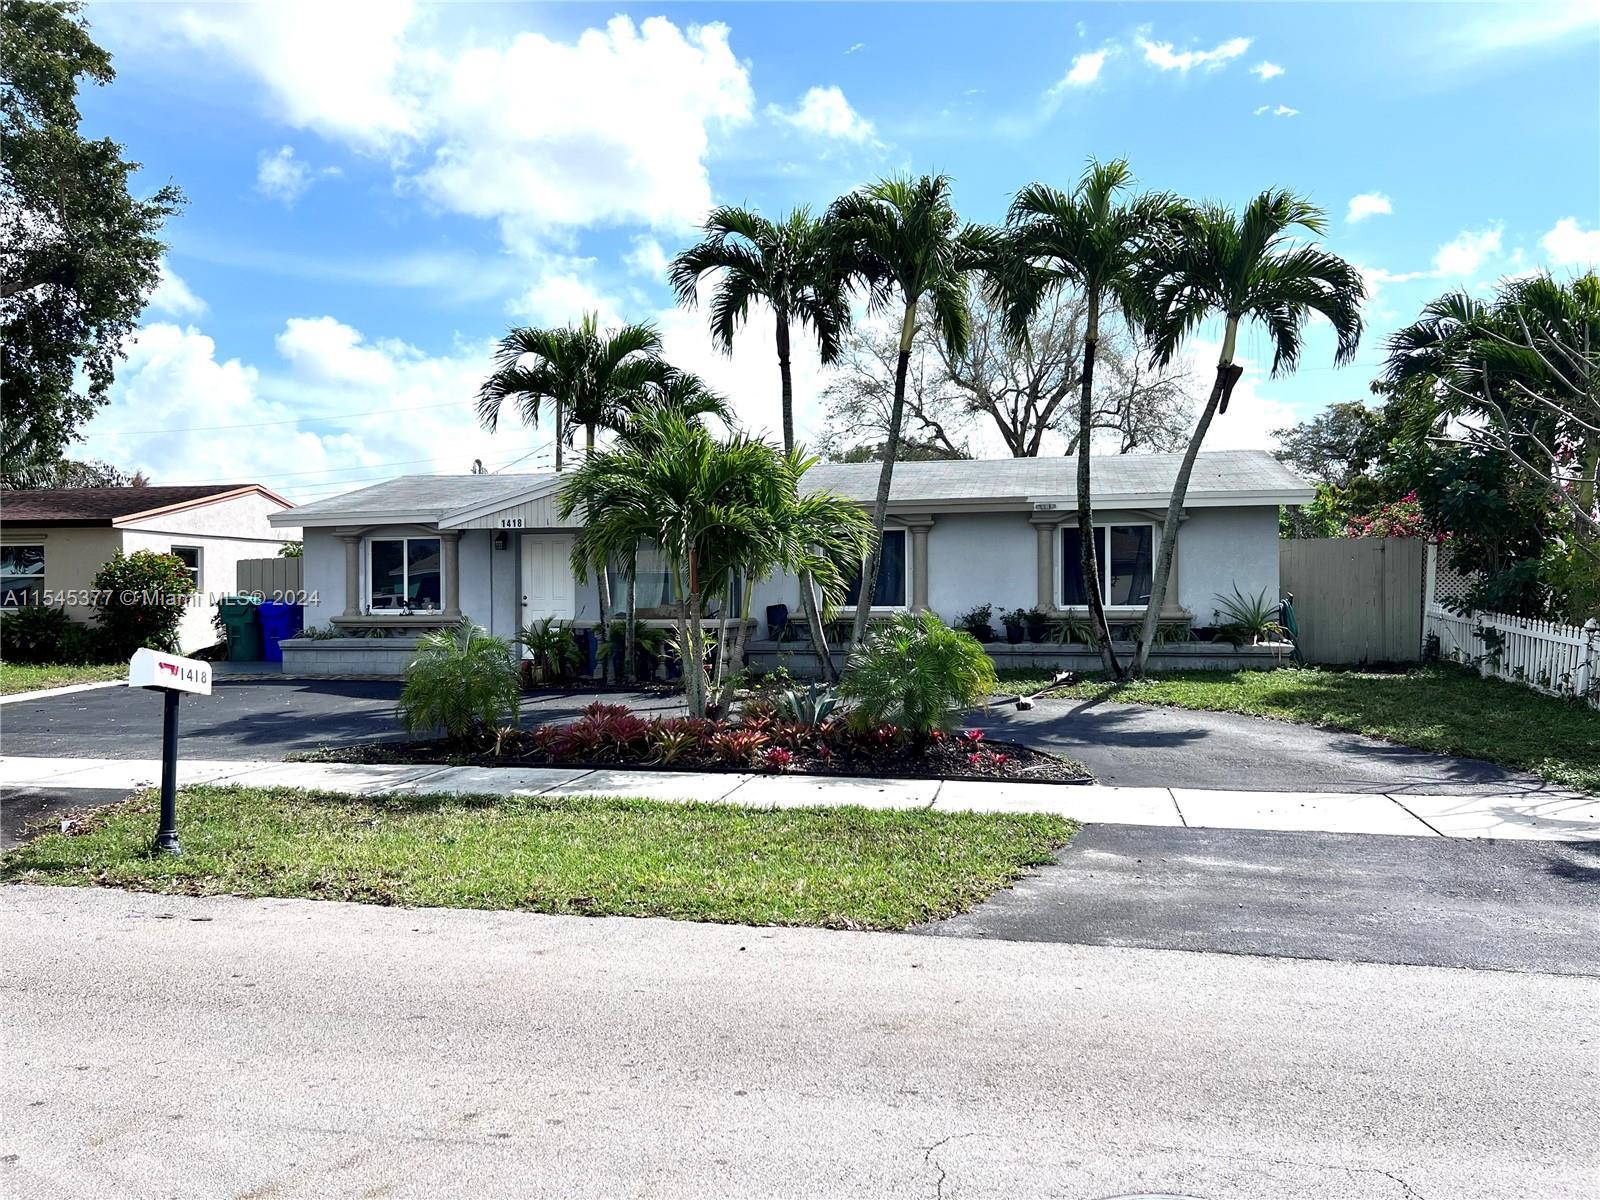 Photo of 1418 SW 50th Ave in Fort Lauderdale, FL